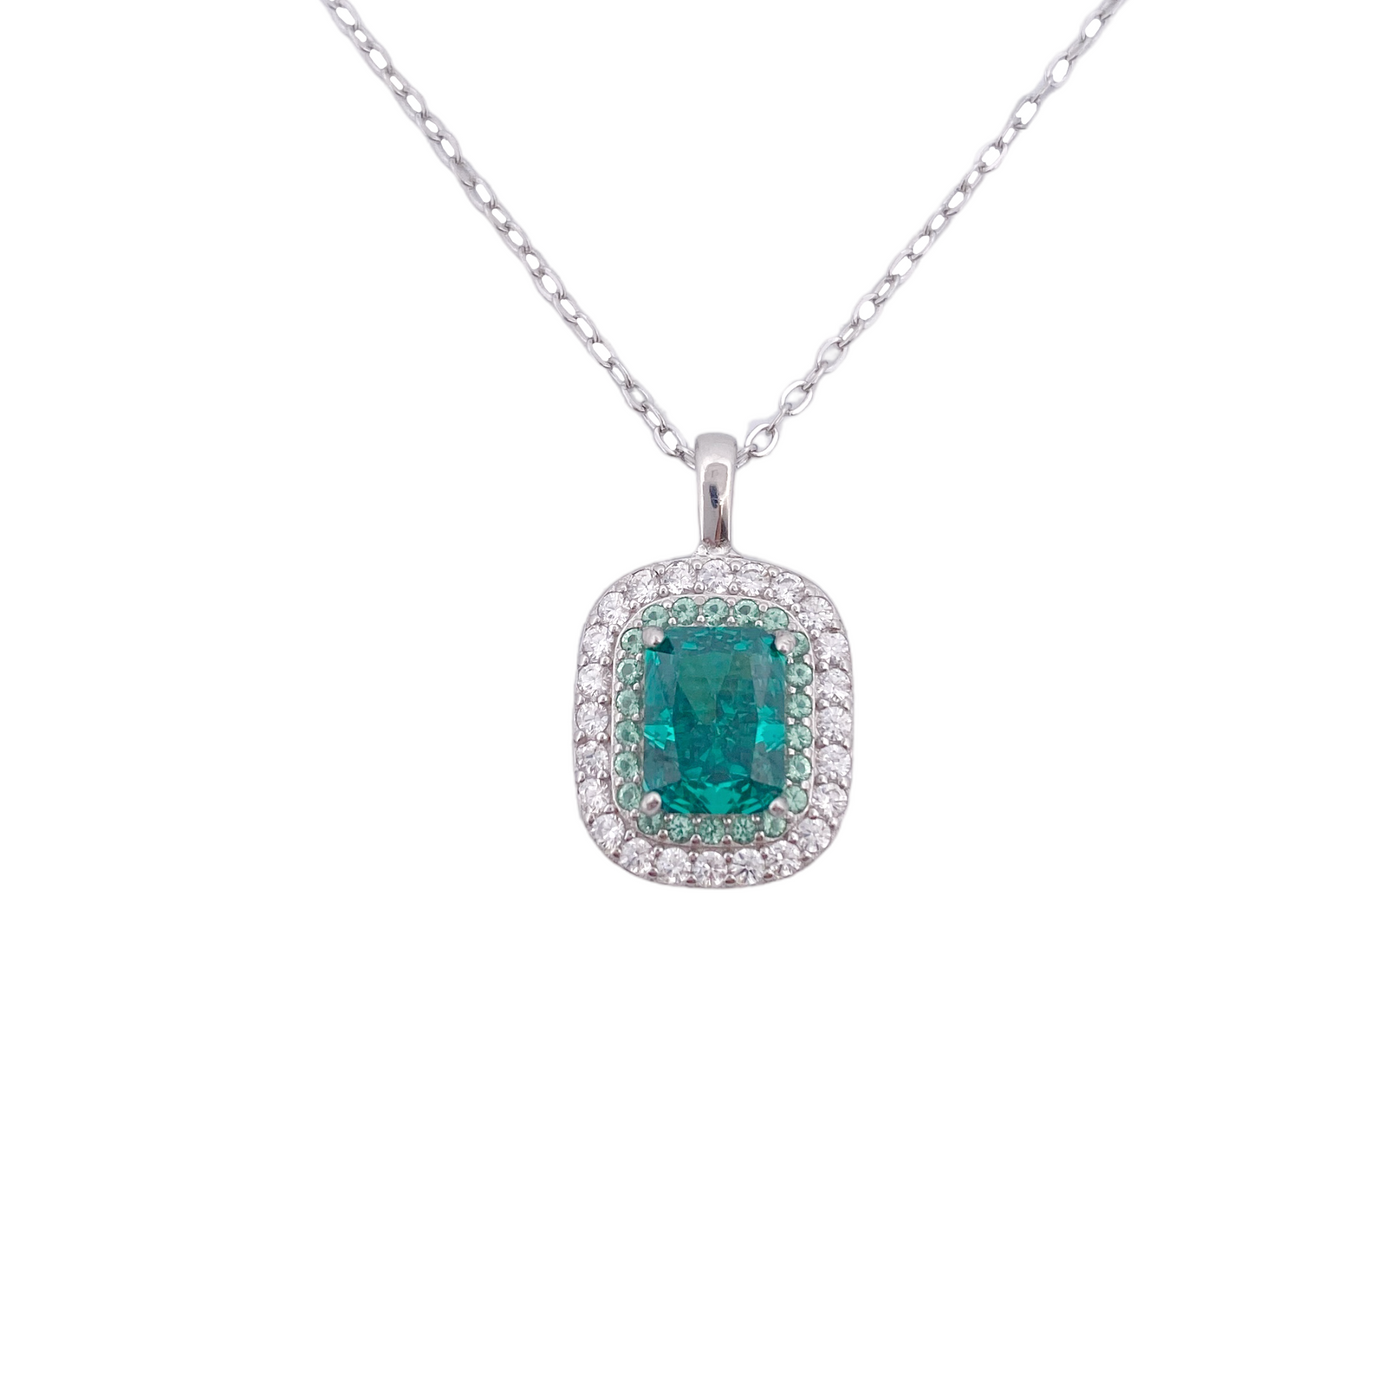 Silver necklace with a rectangular diamond replica charm